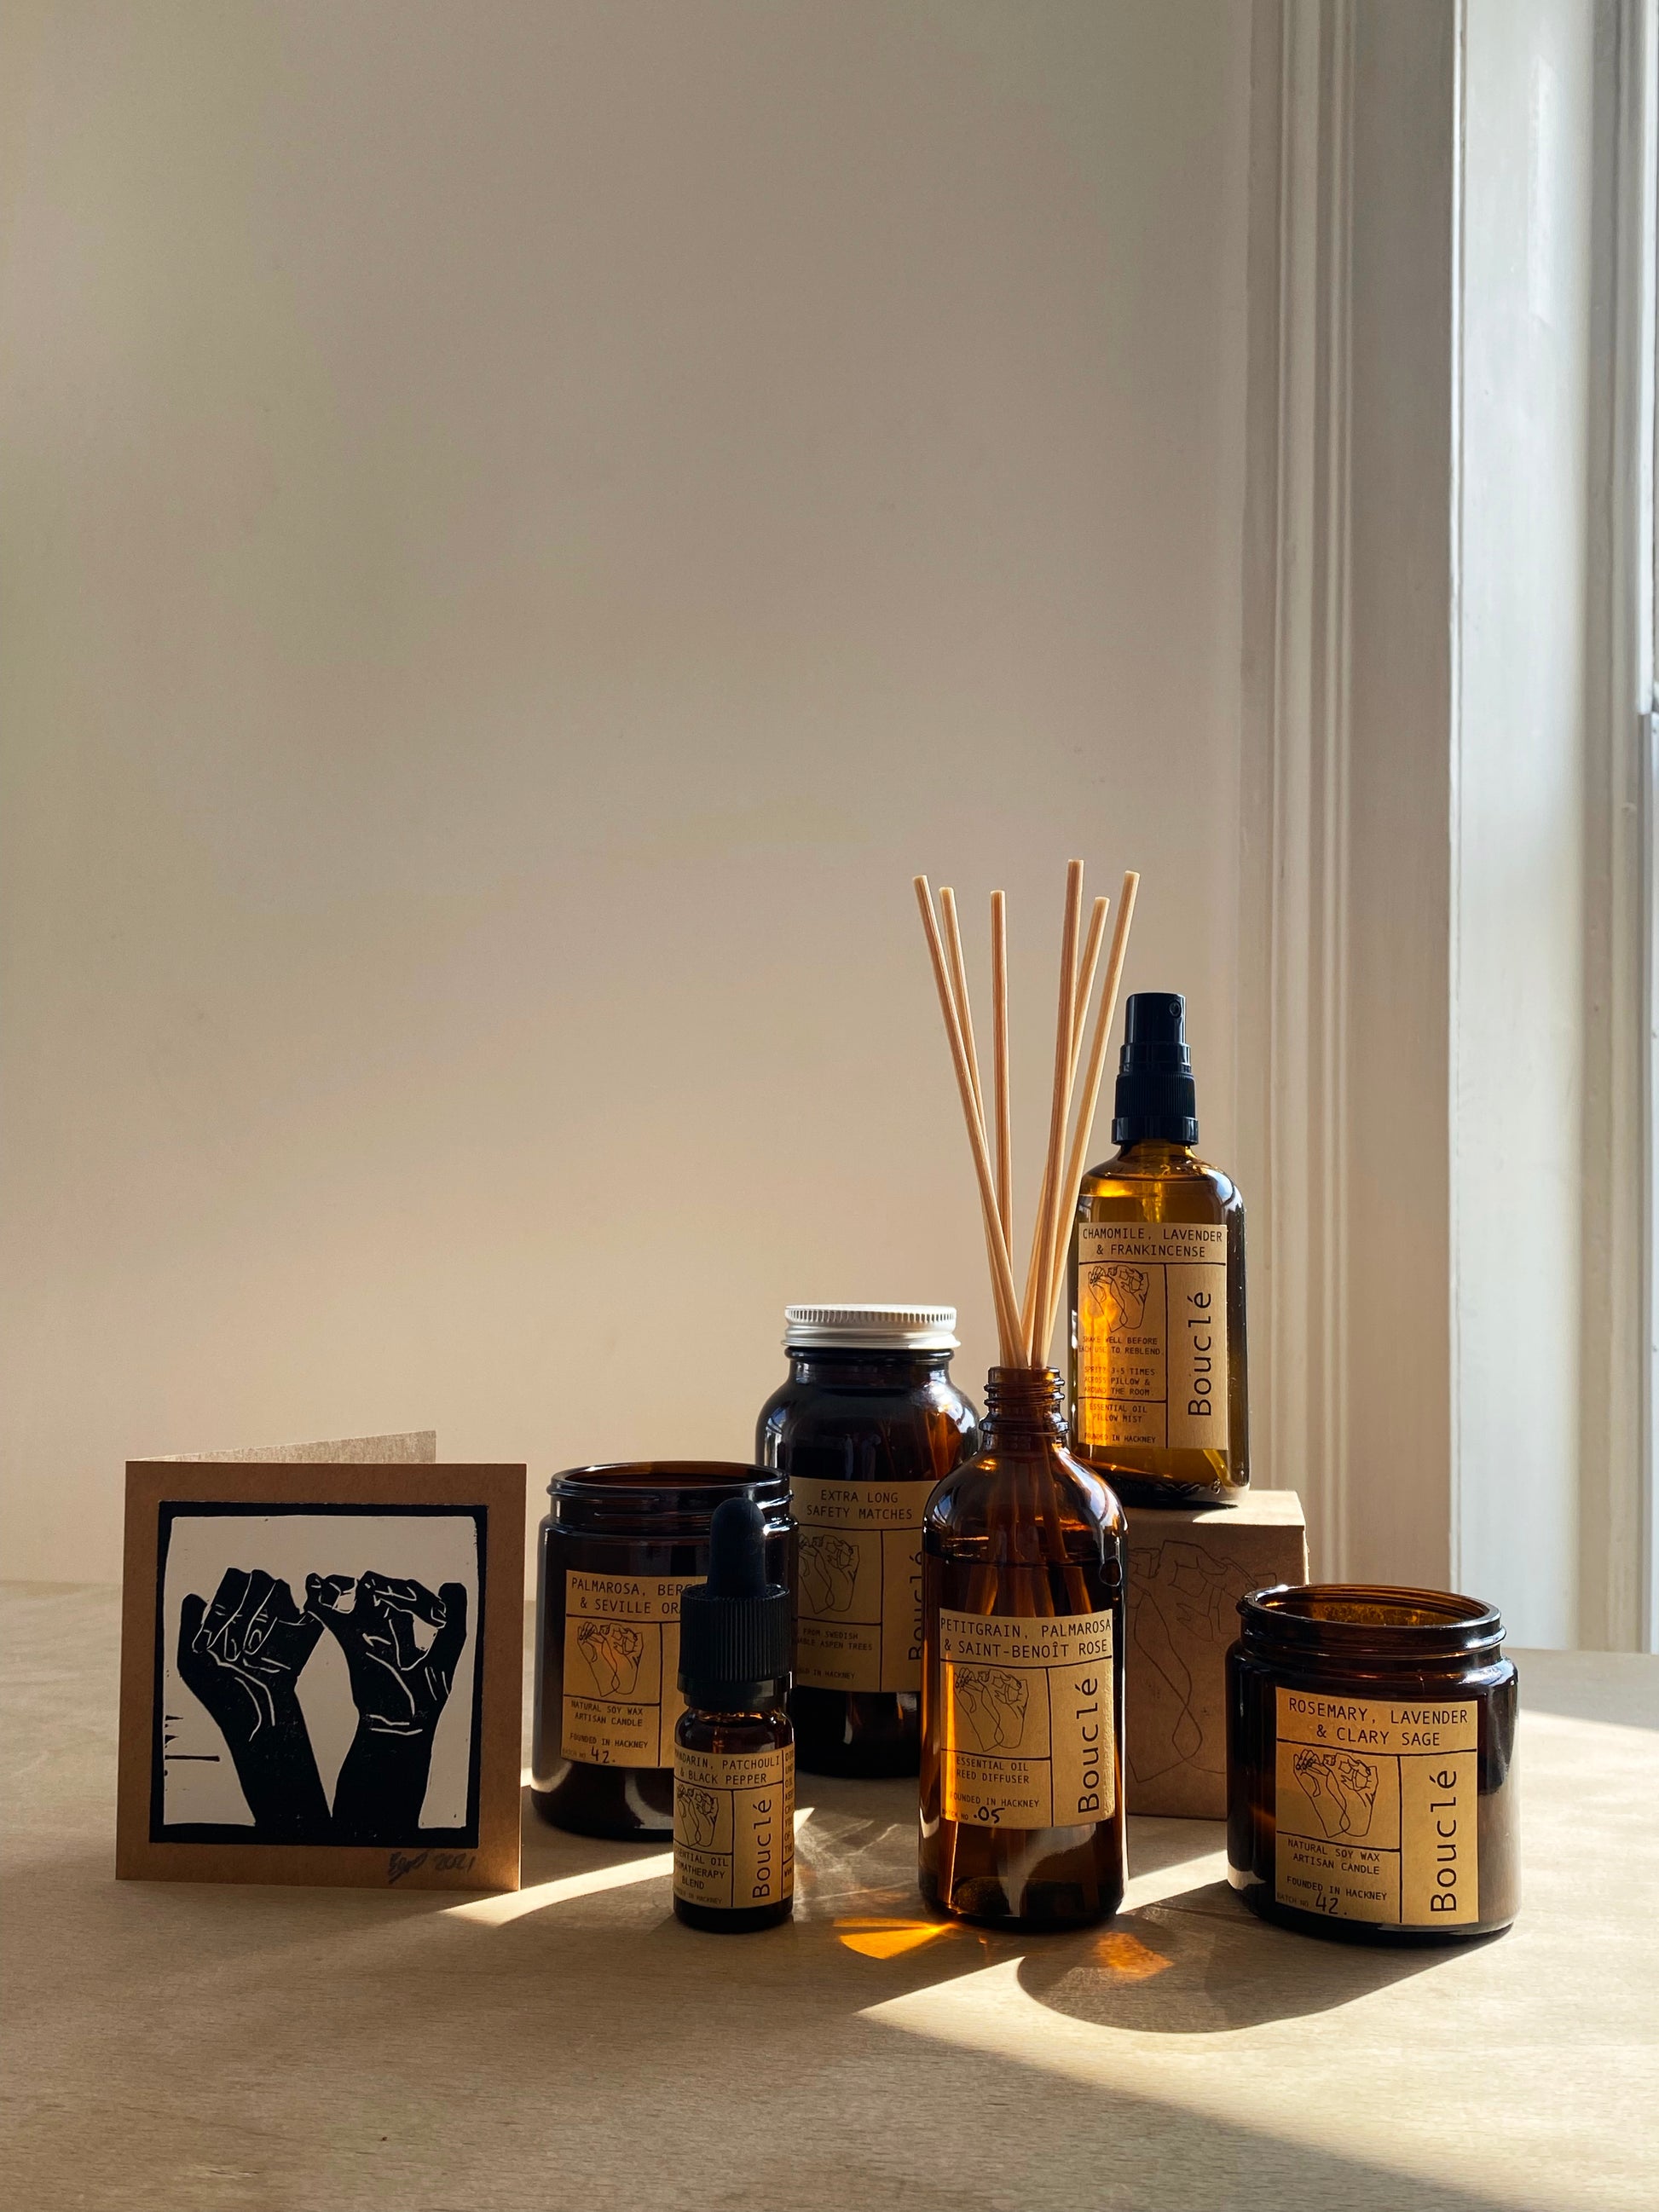 Bouclé London all natural products including a soy wax candle, essential oil reed diffuser, pillow spray, extra long matches & essential oil blend. 